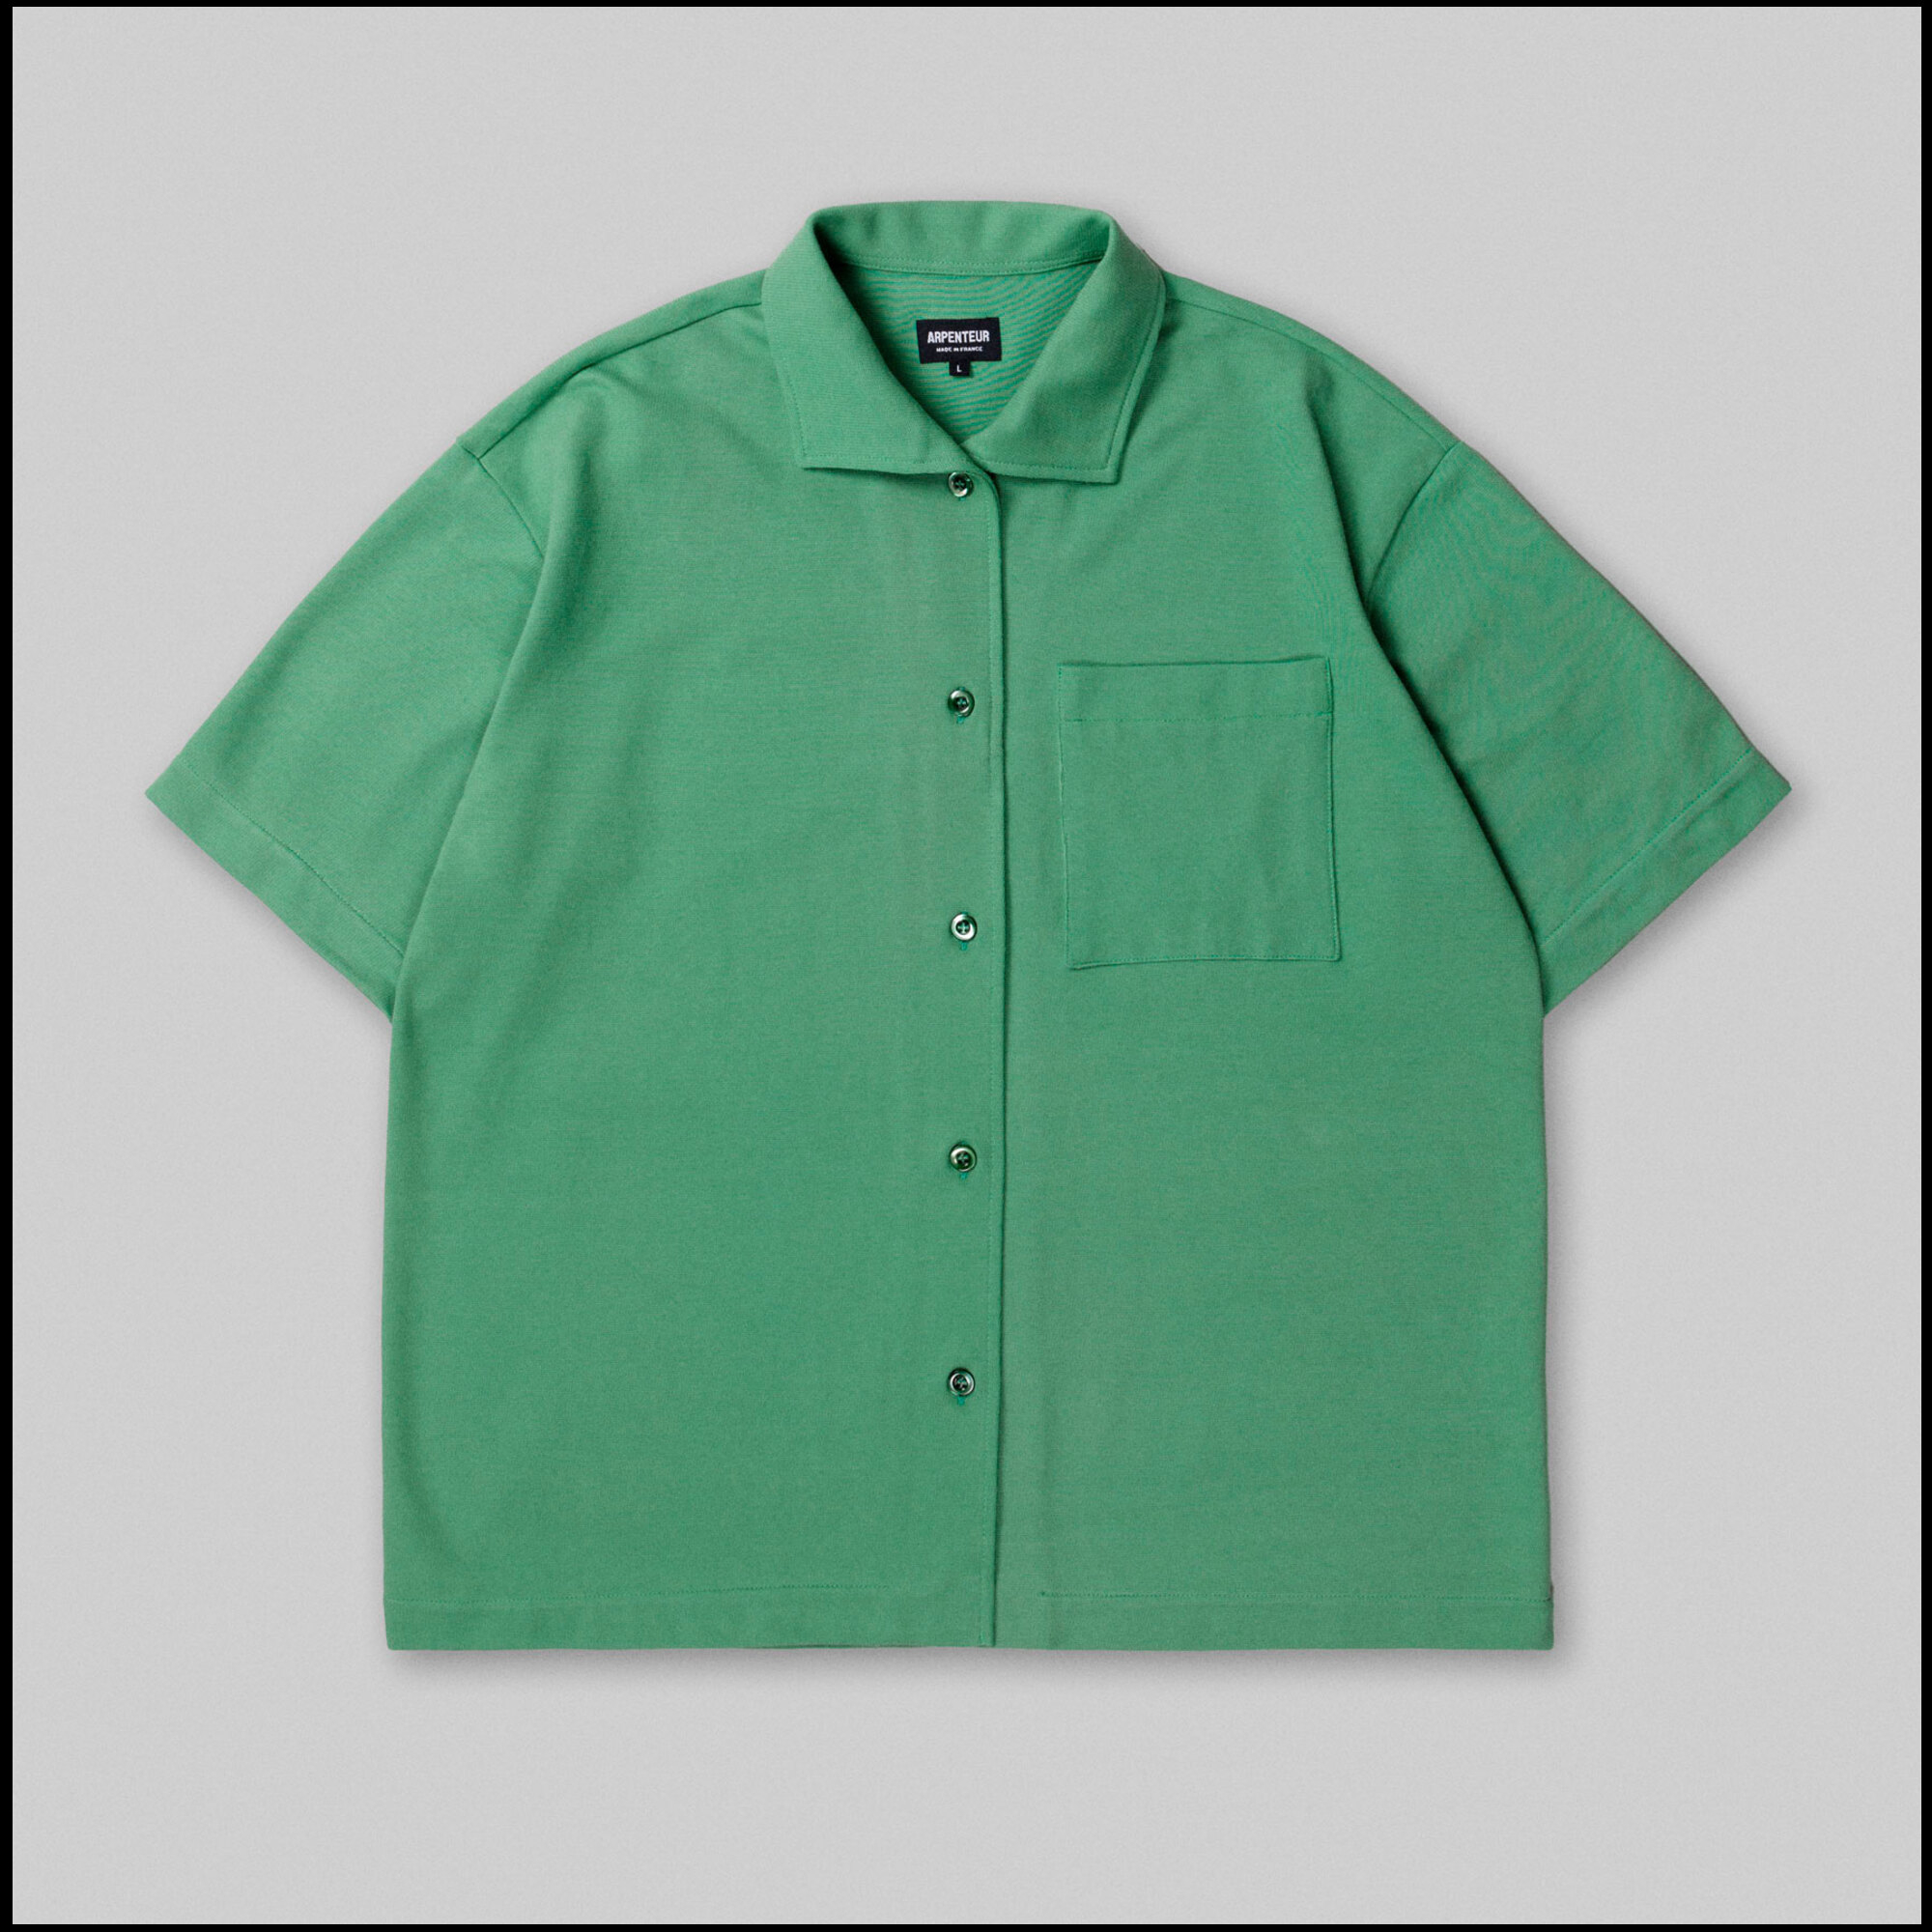 CORAL short sleeve shirt by Arpenteur in Leaf green color